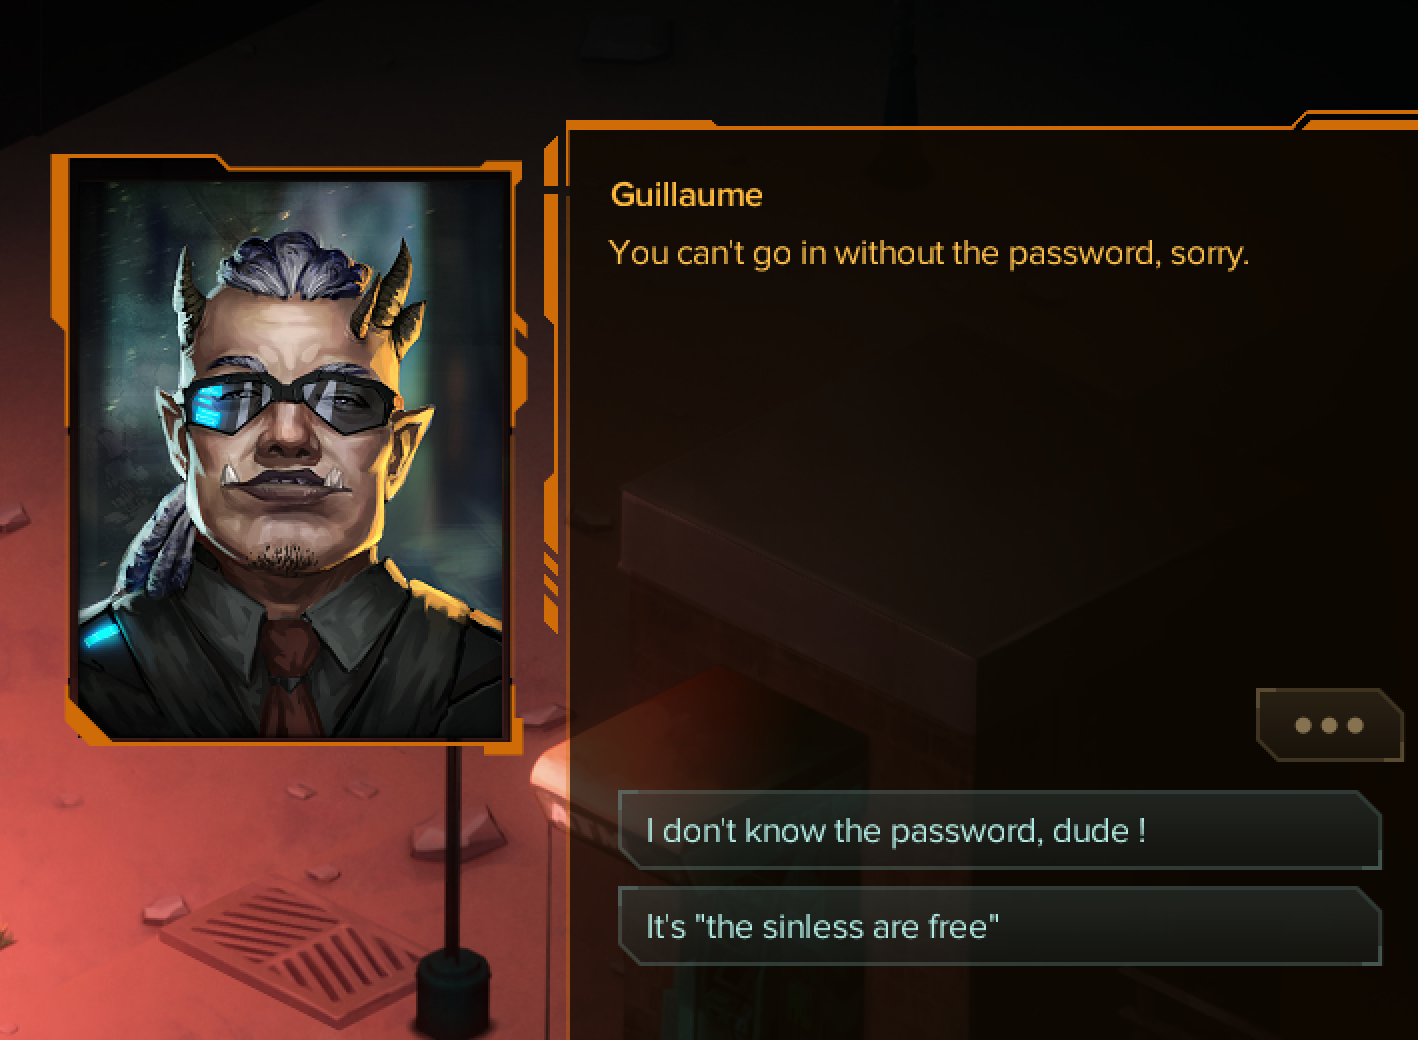 Screenshot of the final dialog in game with the minimum "non disappearing" choices